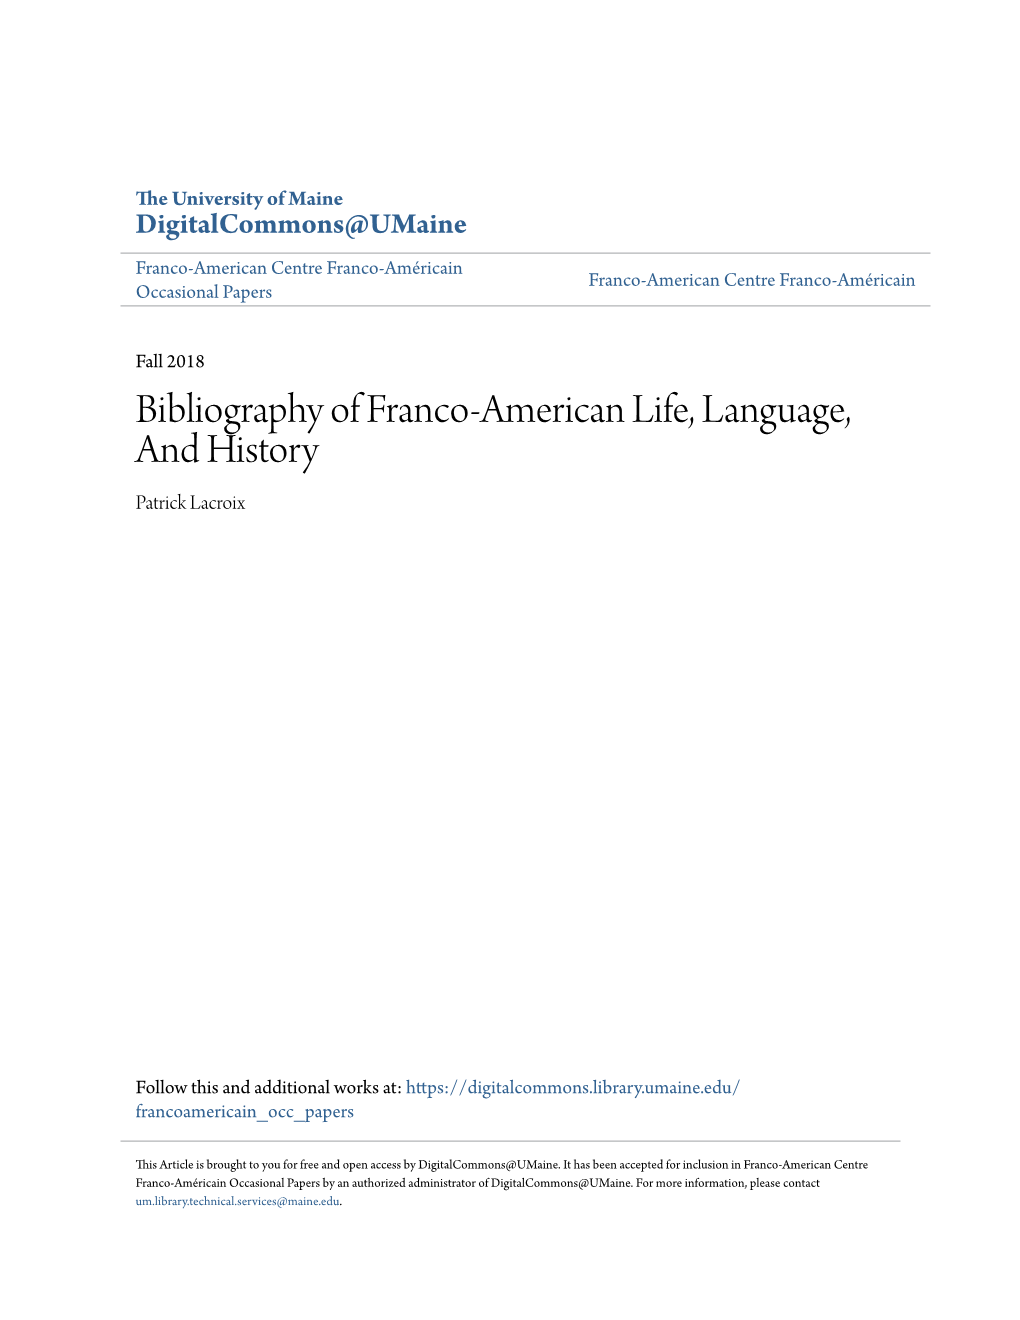 Bibliography of Franco-American Life, Language, and History Patrick Lacroix